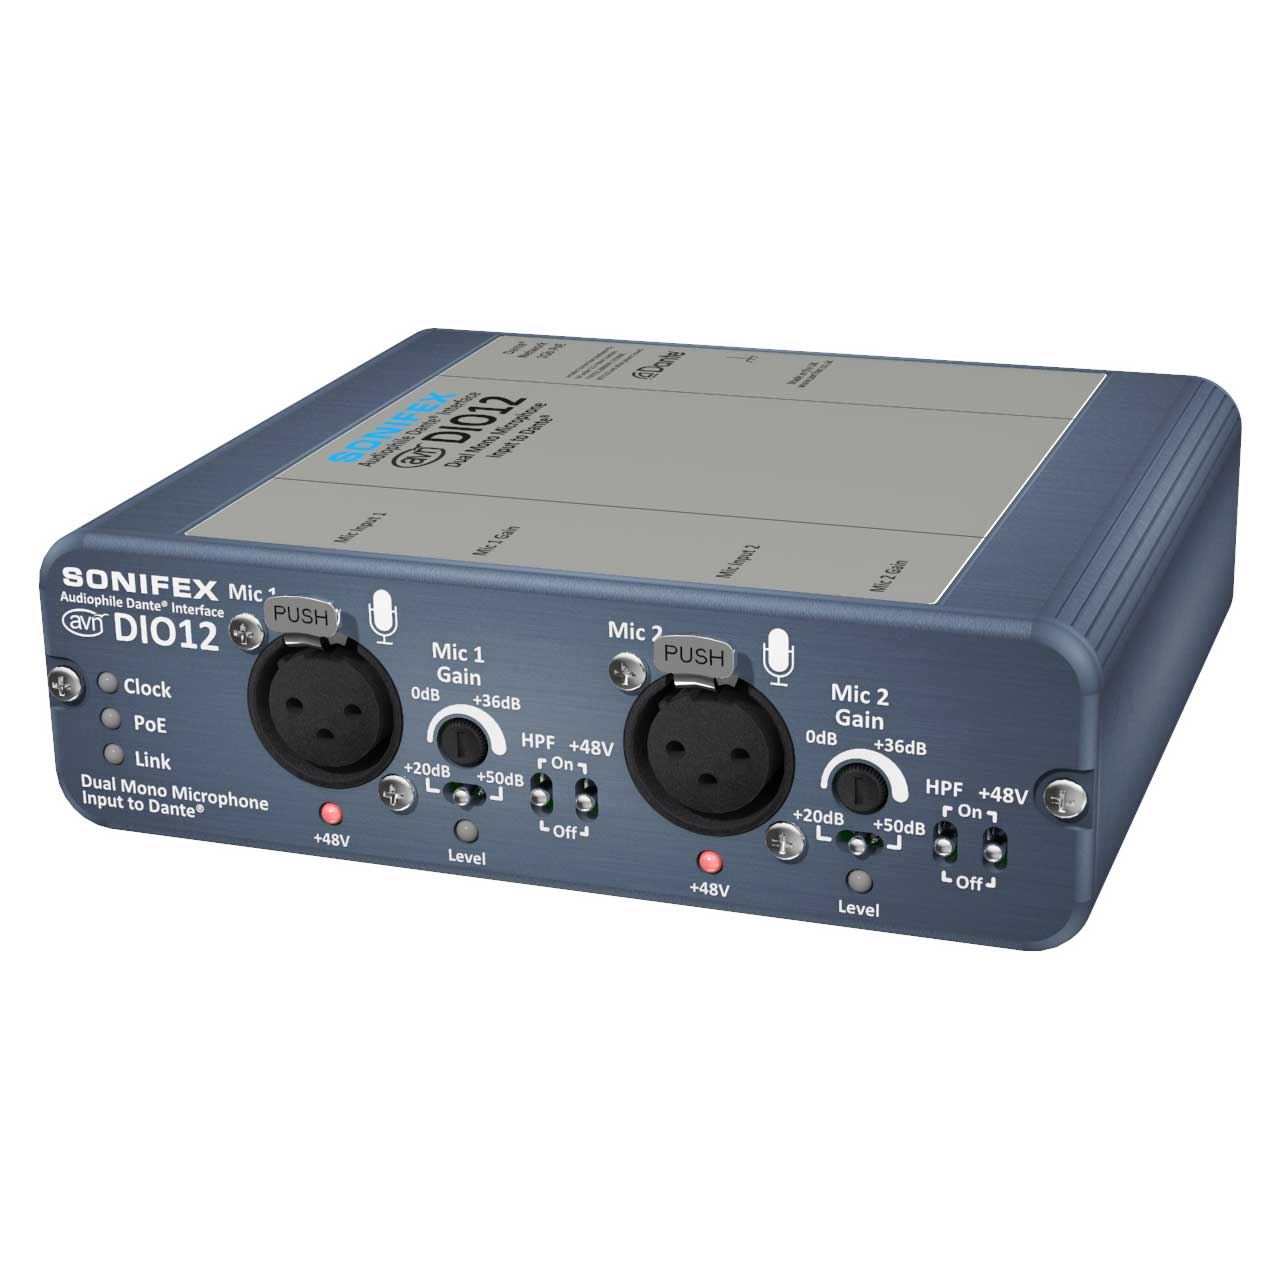 Sonifex AVN-DIO12 Dual Microphone Input to Dante with Mic Gain Converter AVN-DIO12